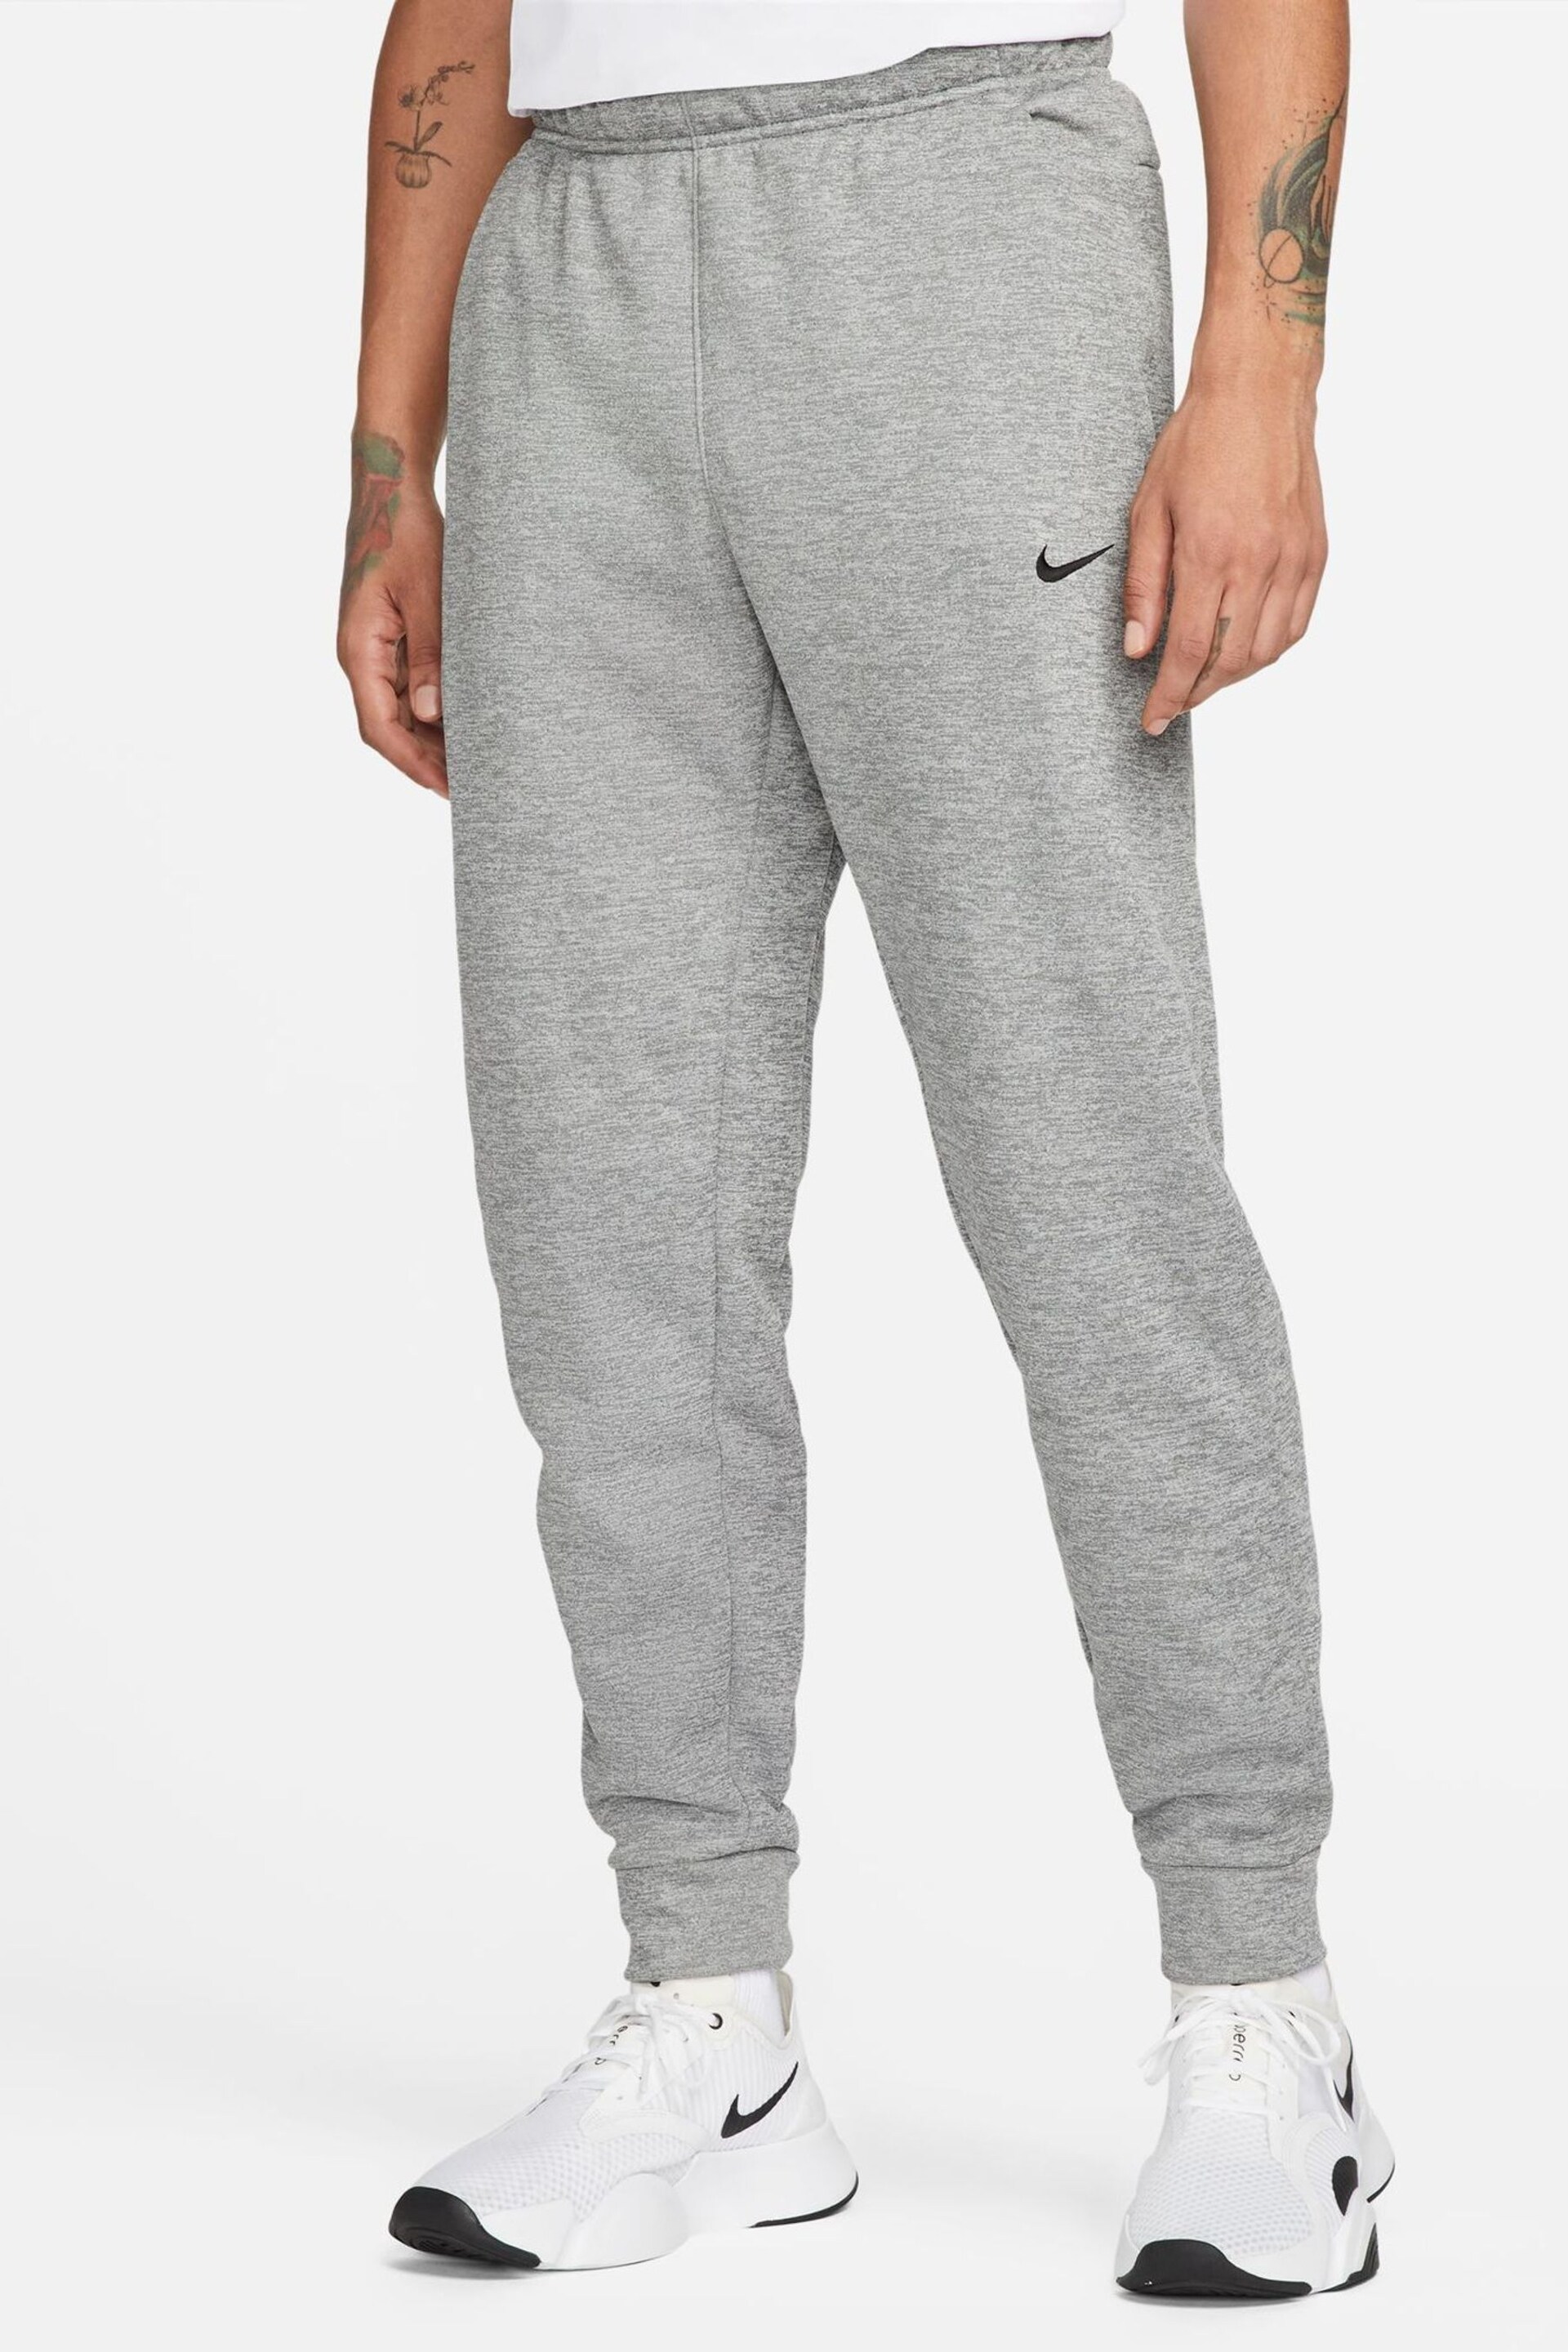 Nike Dark Grey Therma-FIT Training Joggers - Image 1 of 13